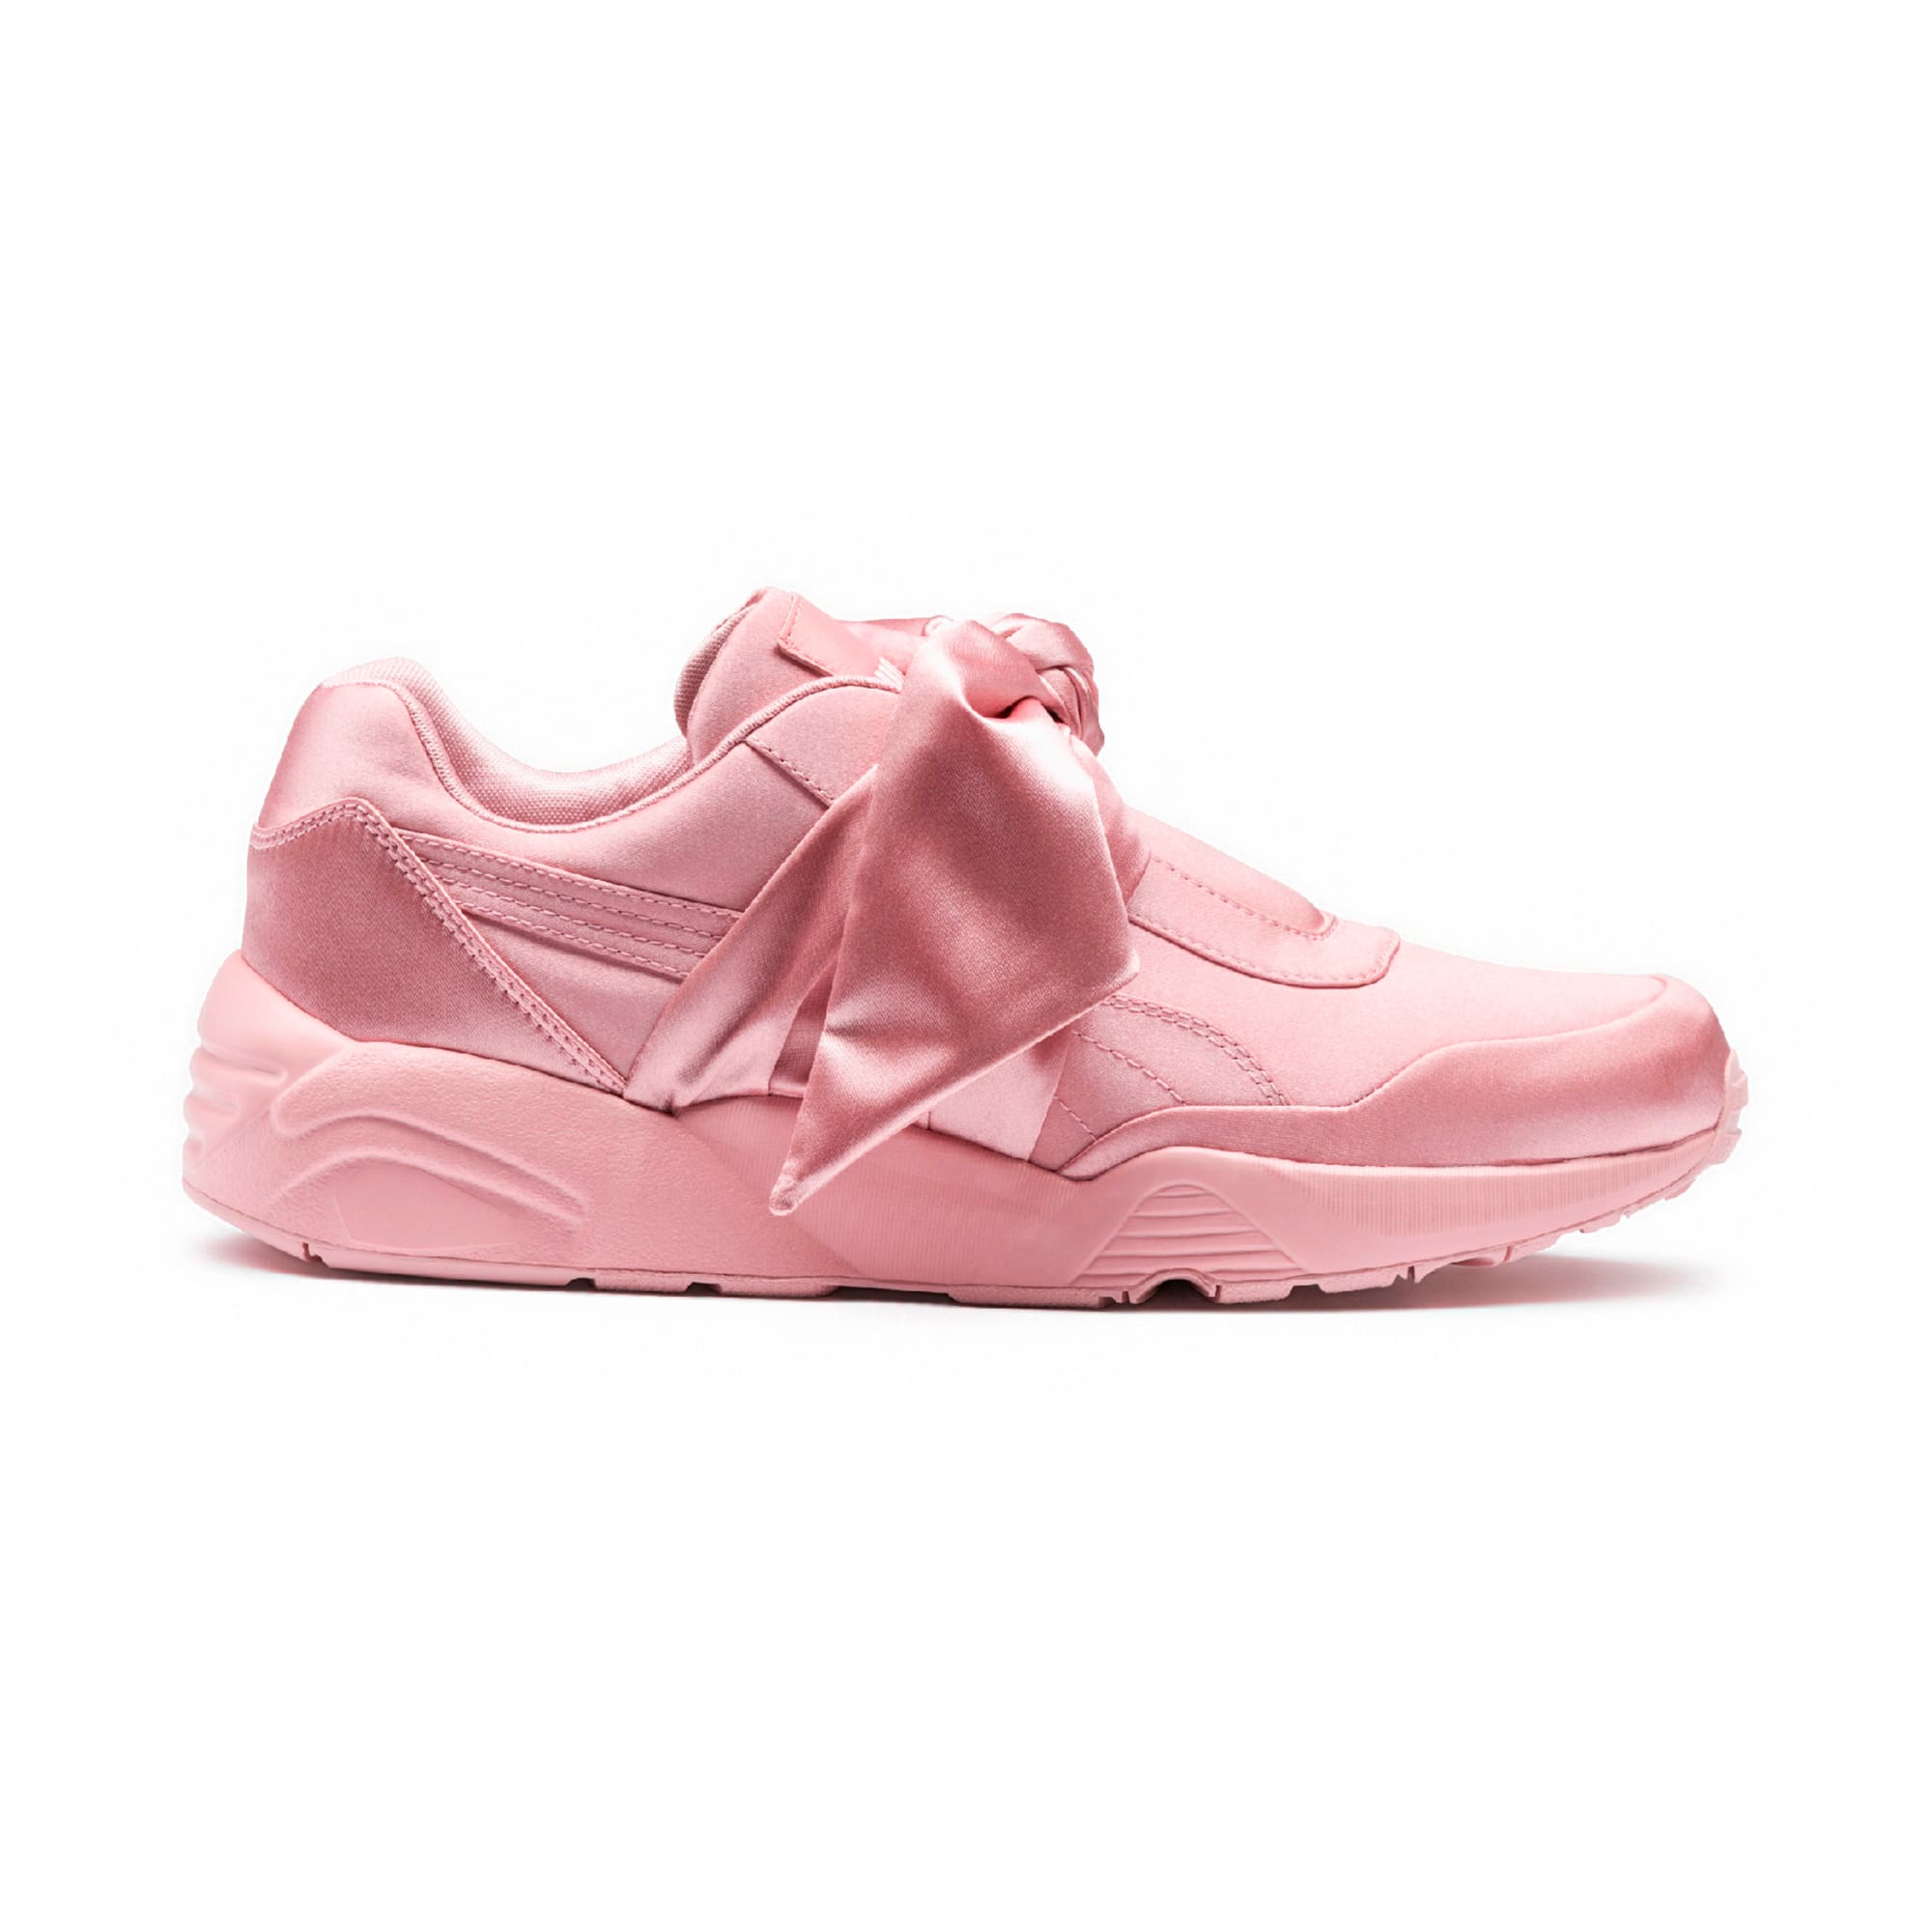 pink puma shoes with ribbon